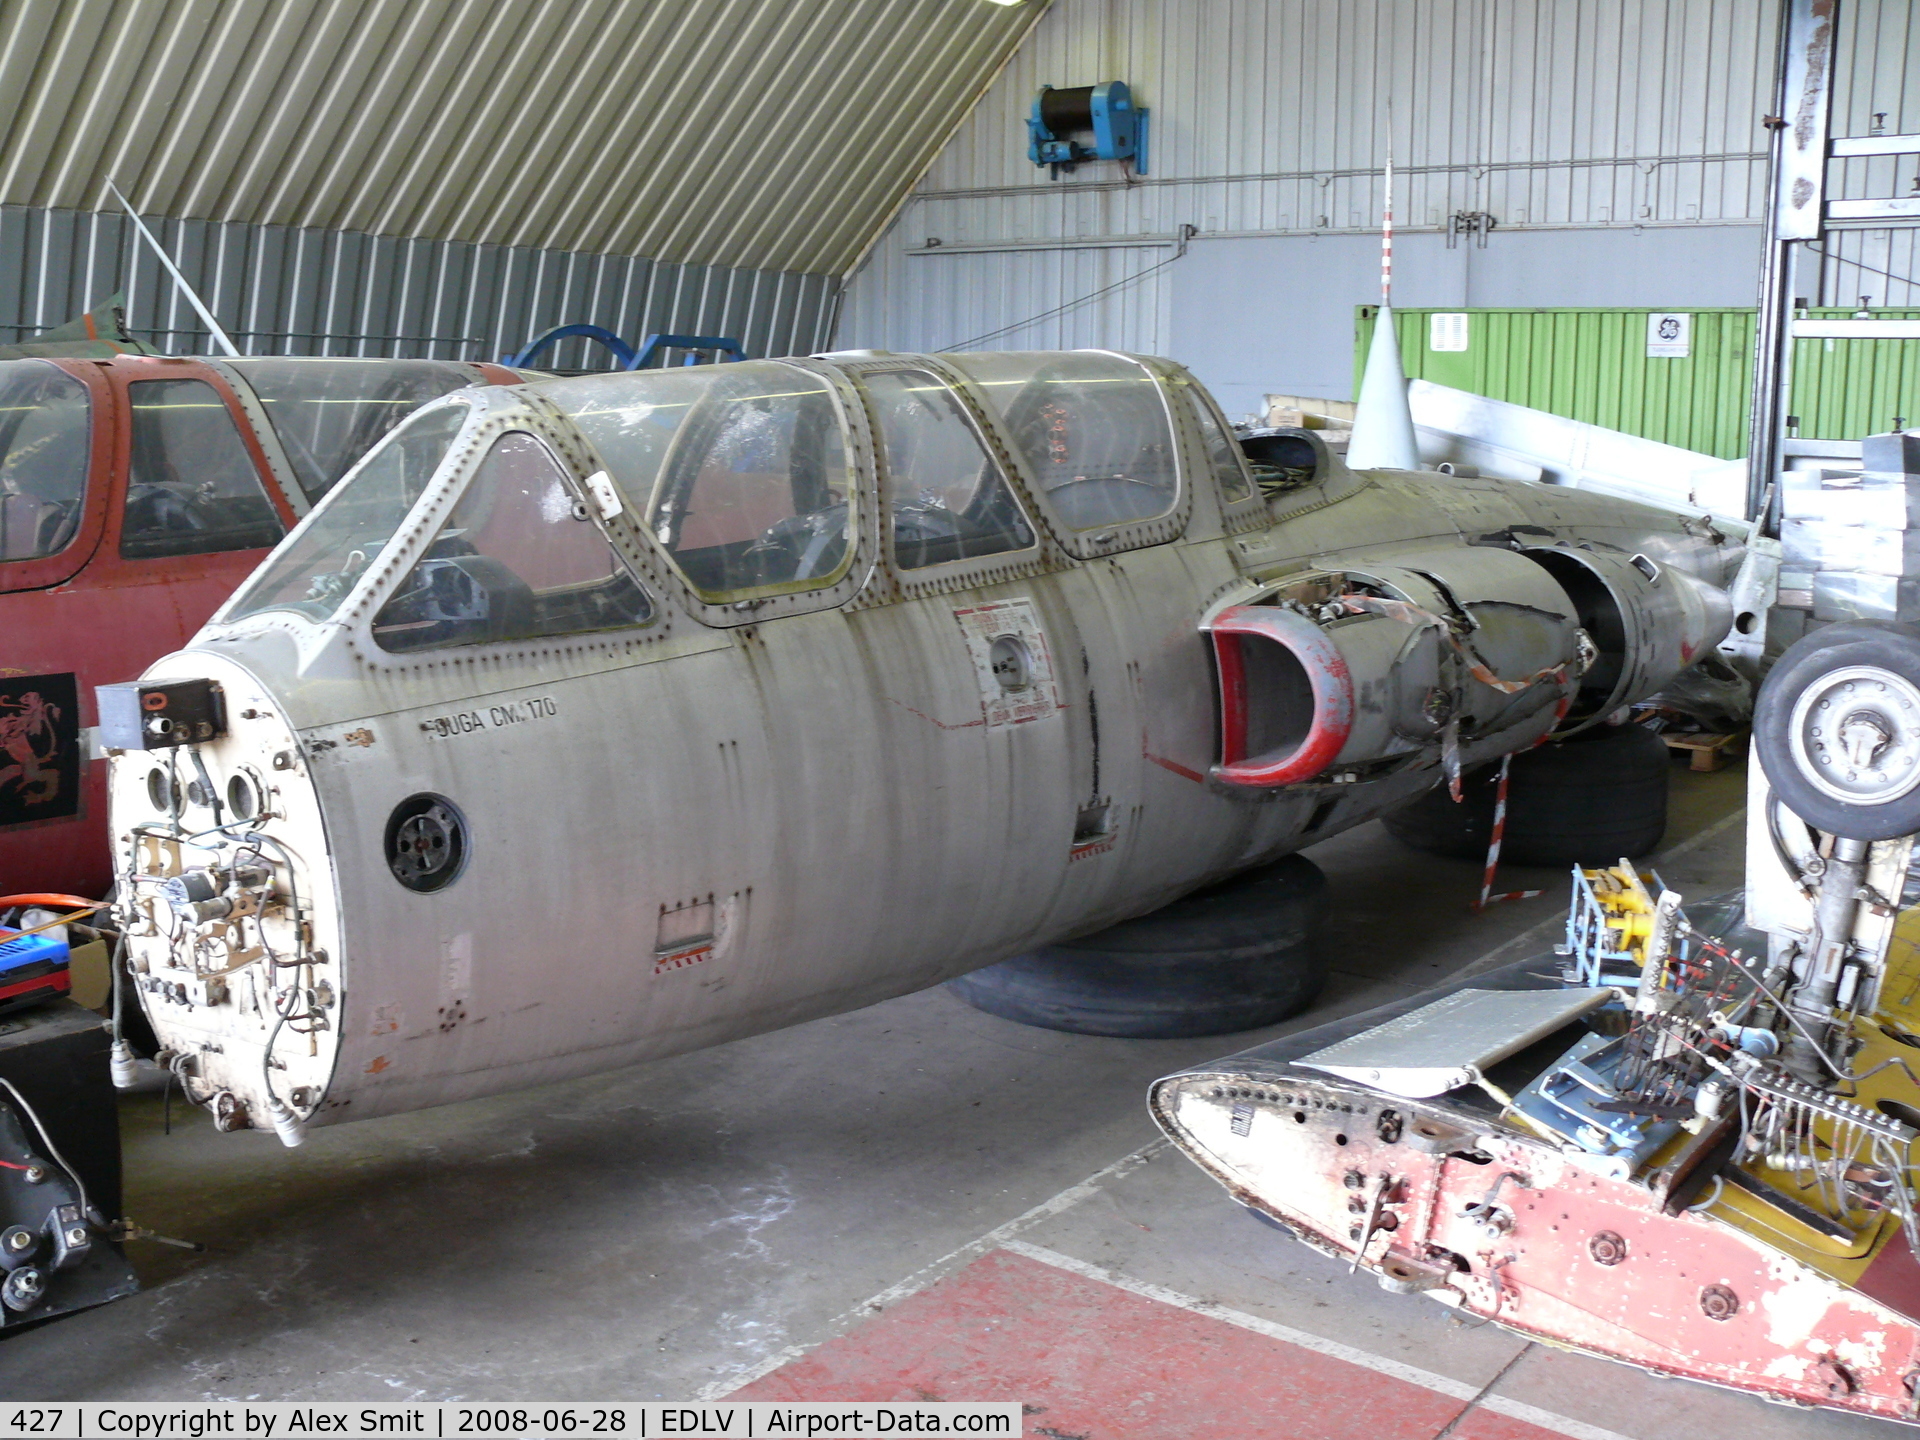 427, Fouga CM-170 Magister C/N 427, Fouga CM-170 Magister 427/4-WA ex French Air Force, the remainders are stored in a shelter at EDLV waiting for better times.